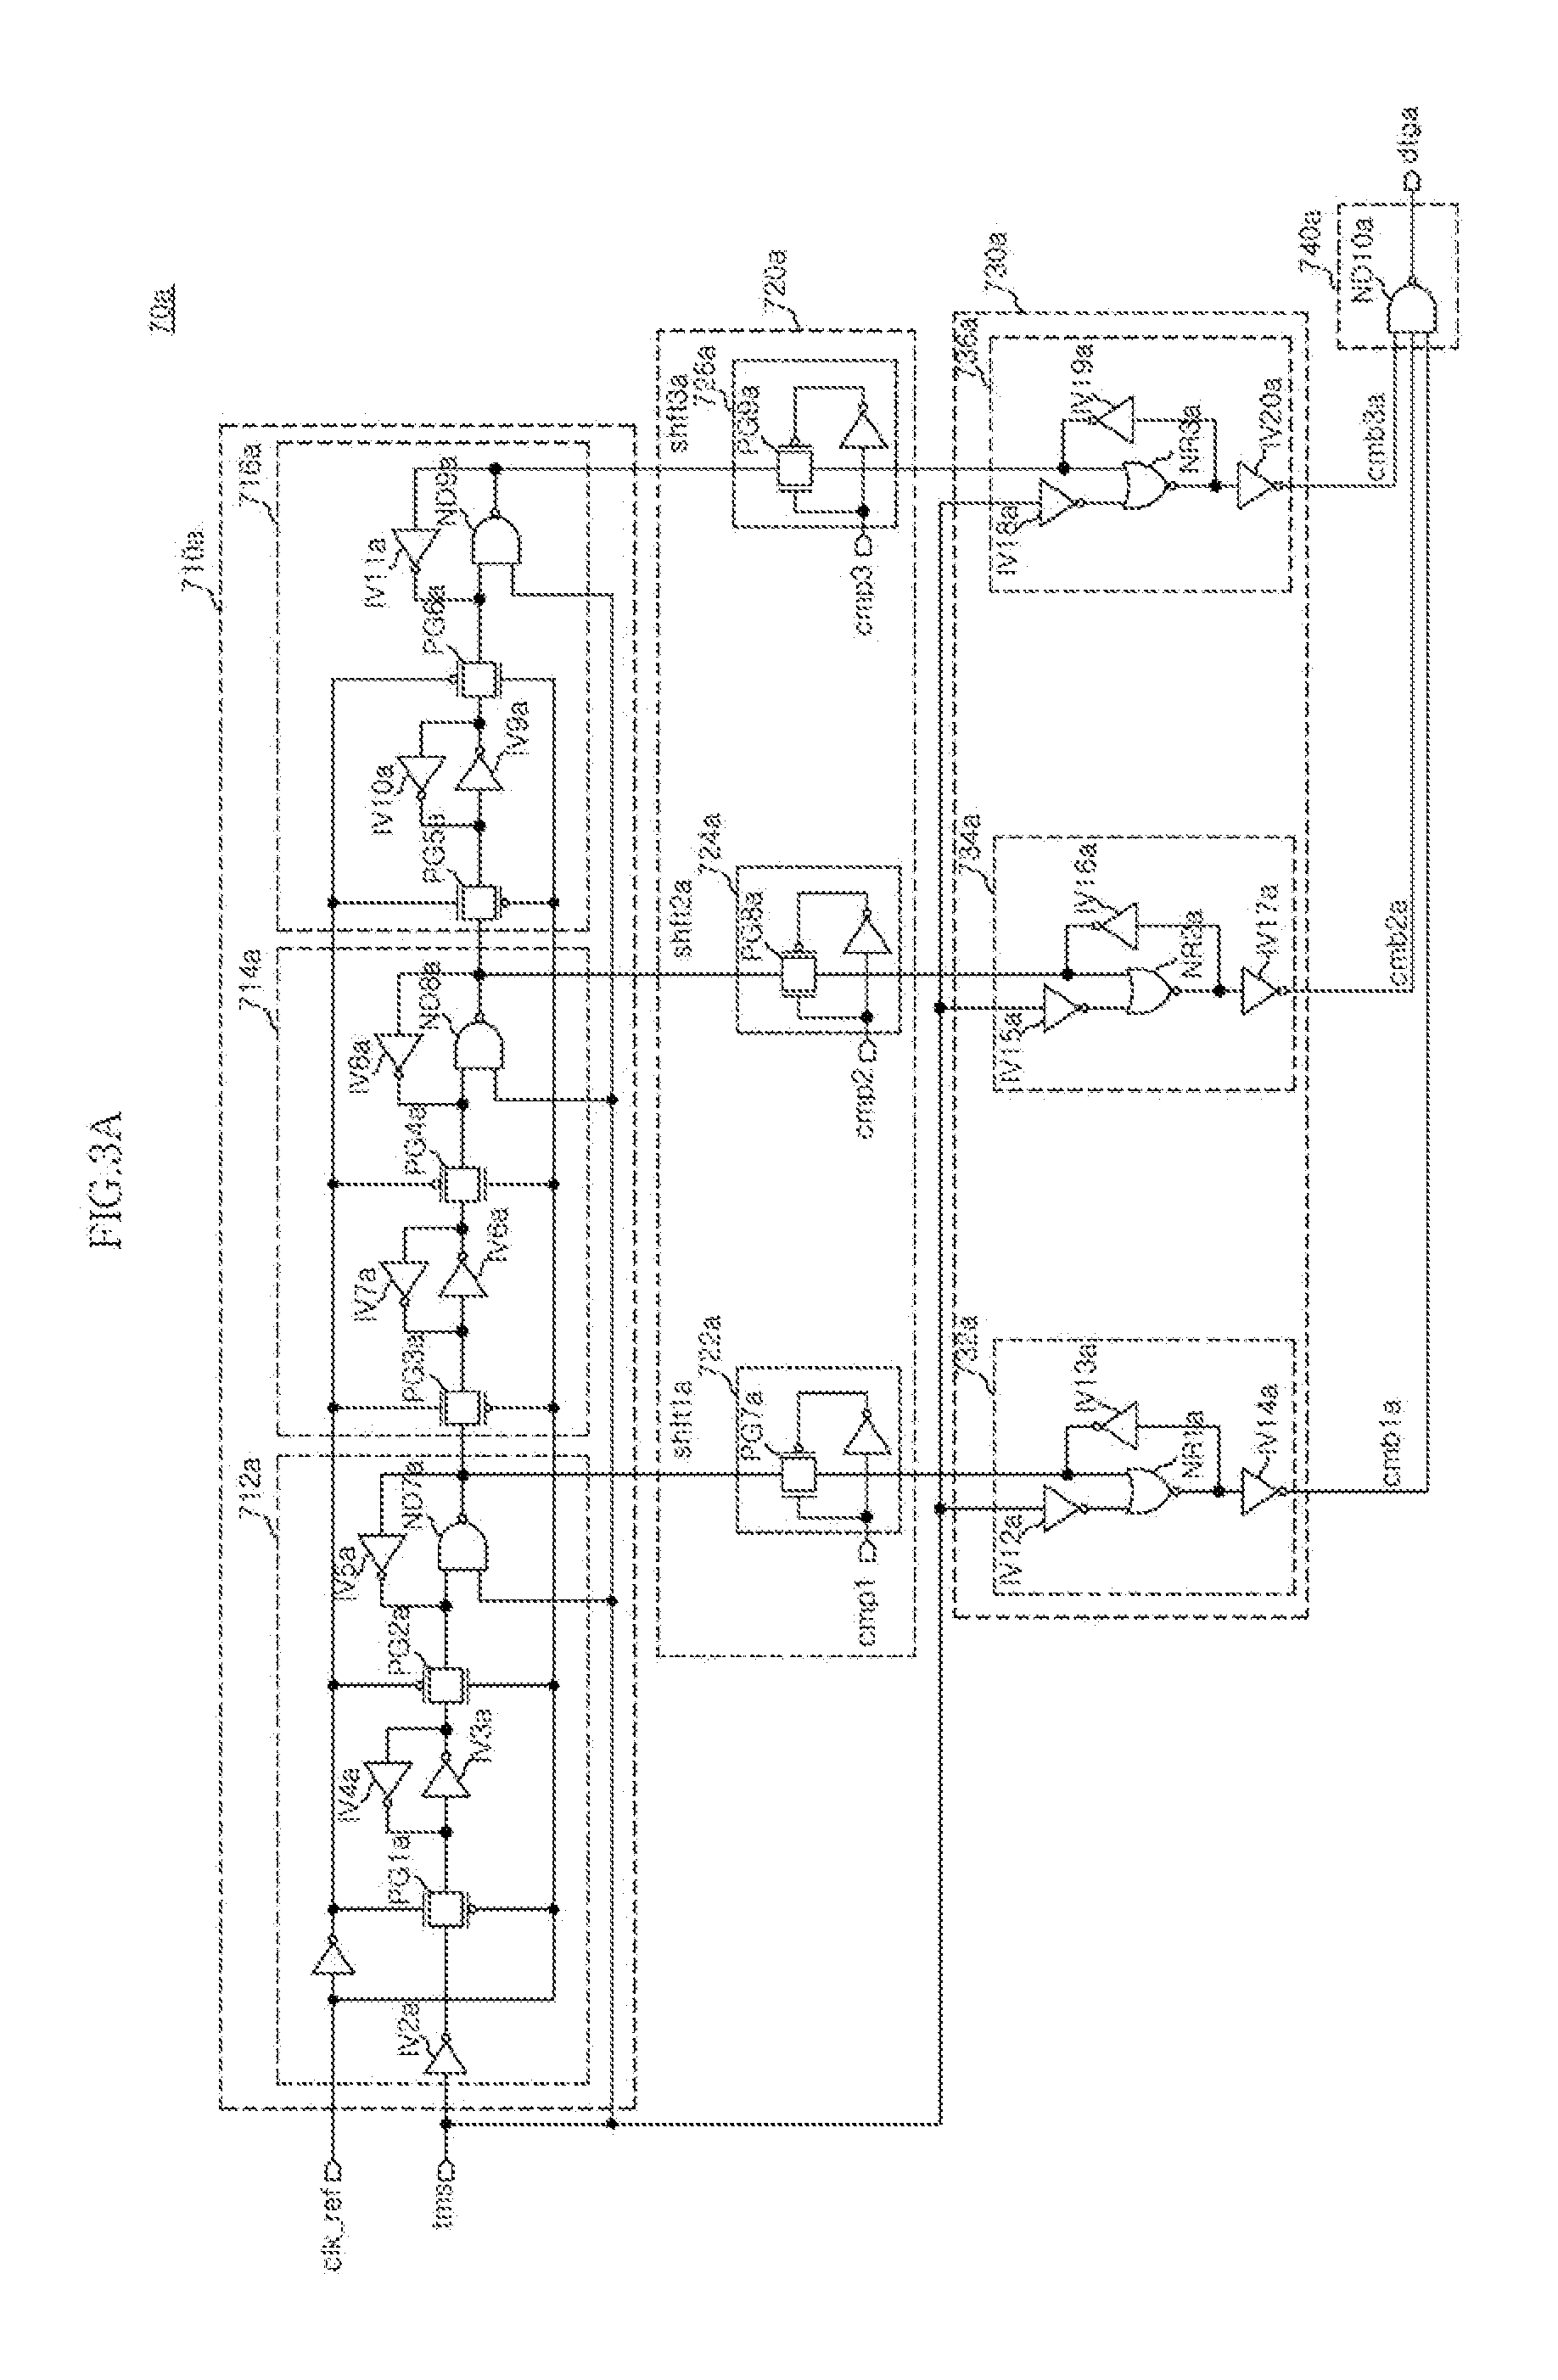 Clock test apparatus and method for semiconductor integrated circuit